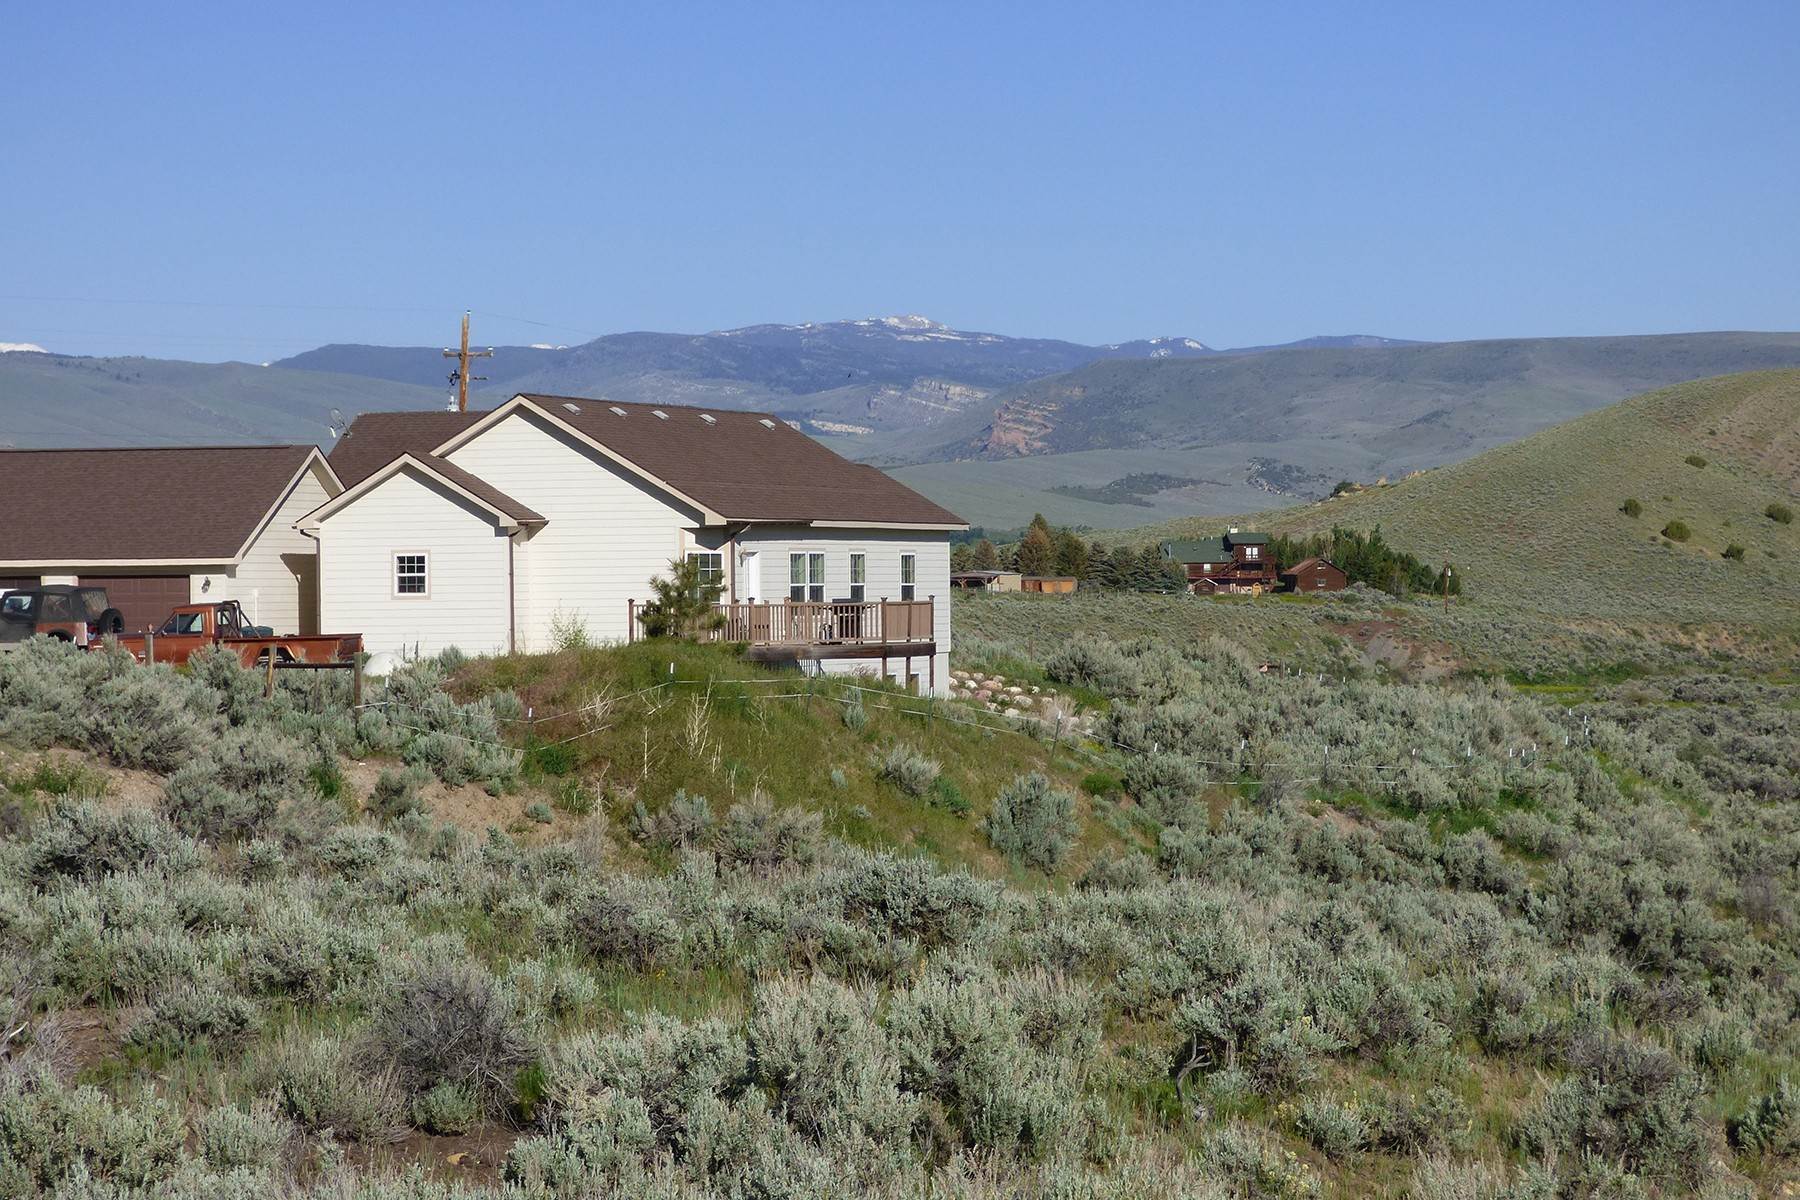 11. Farm and Ranch Properties for Sale at Twin Creek Ranch - Lander, WY 7072 Highway 789 Lander, Wyoming 82520 United States